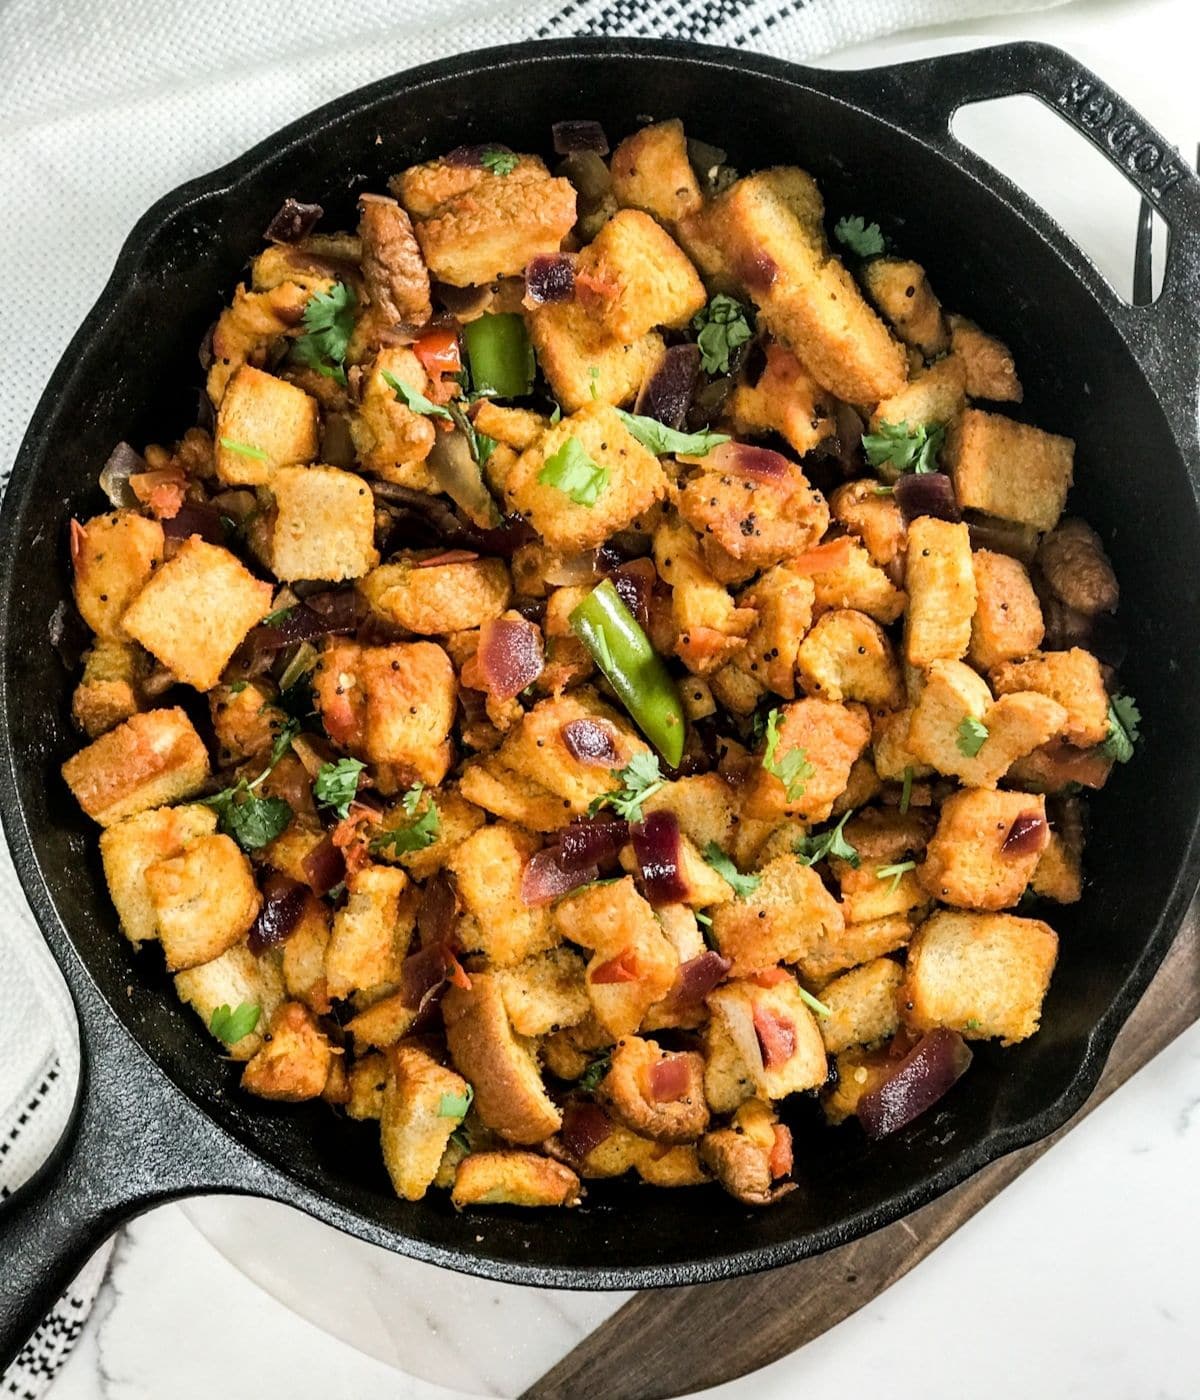 A cast iron pan is filled with bread upma and placed over the white surface